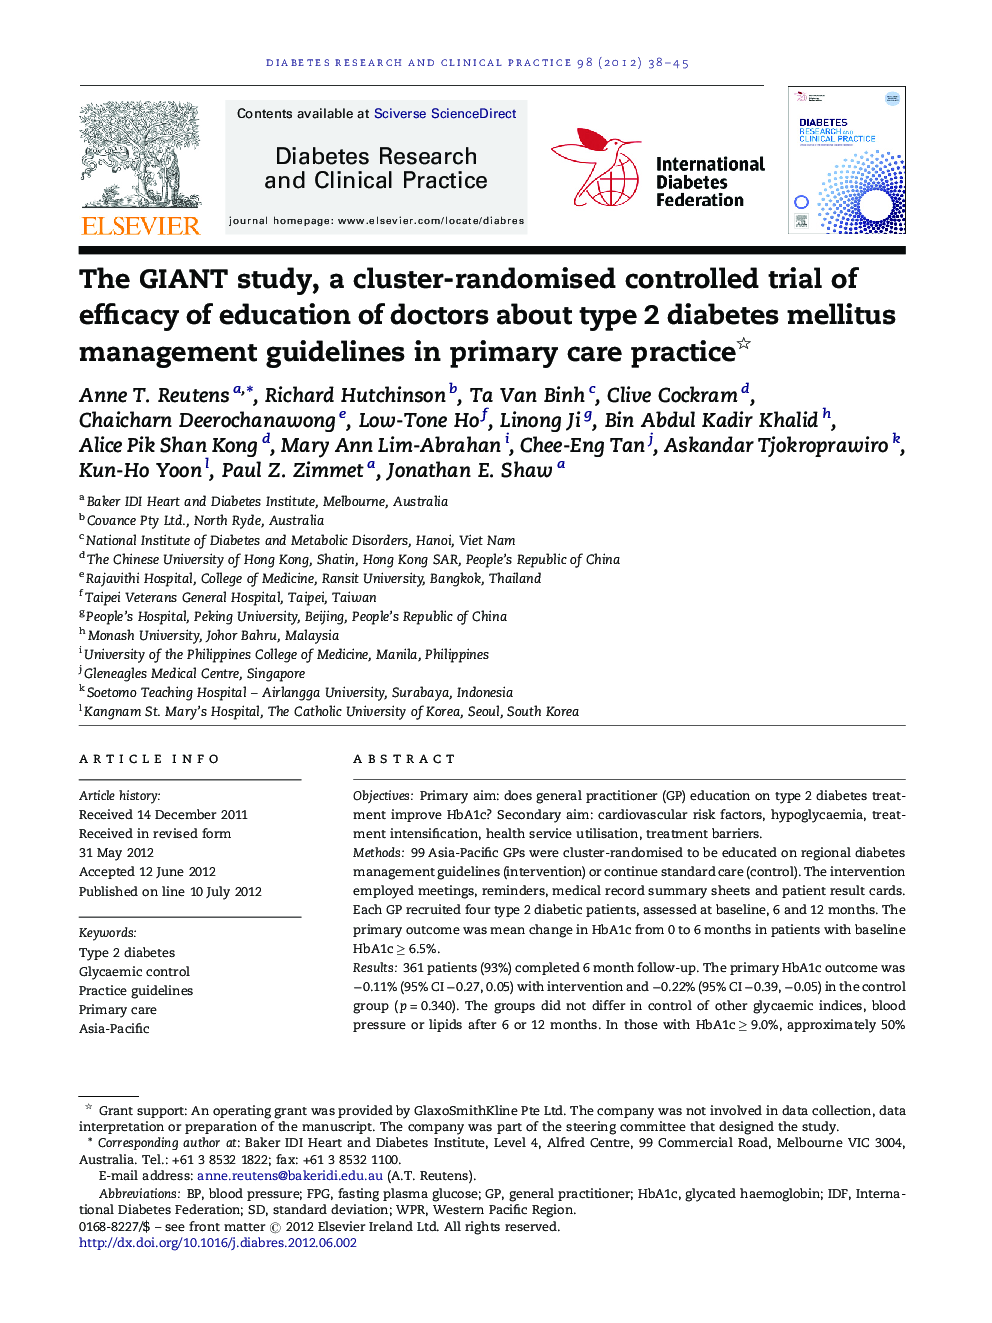 The GIANT study, a cluster-randomised controlled trial of efficacy of education of doctors about type 2 diabetes mellitus management guidelines in primary care practice